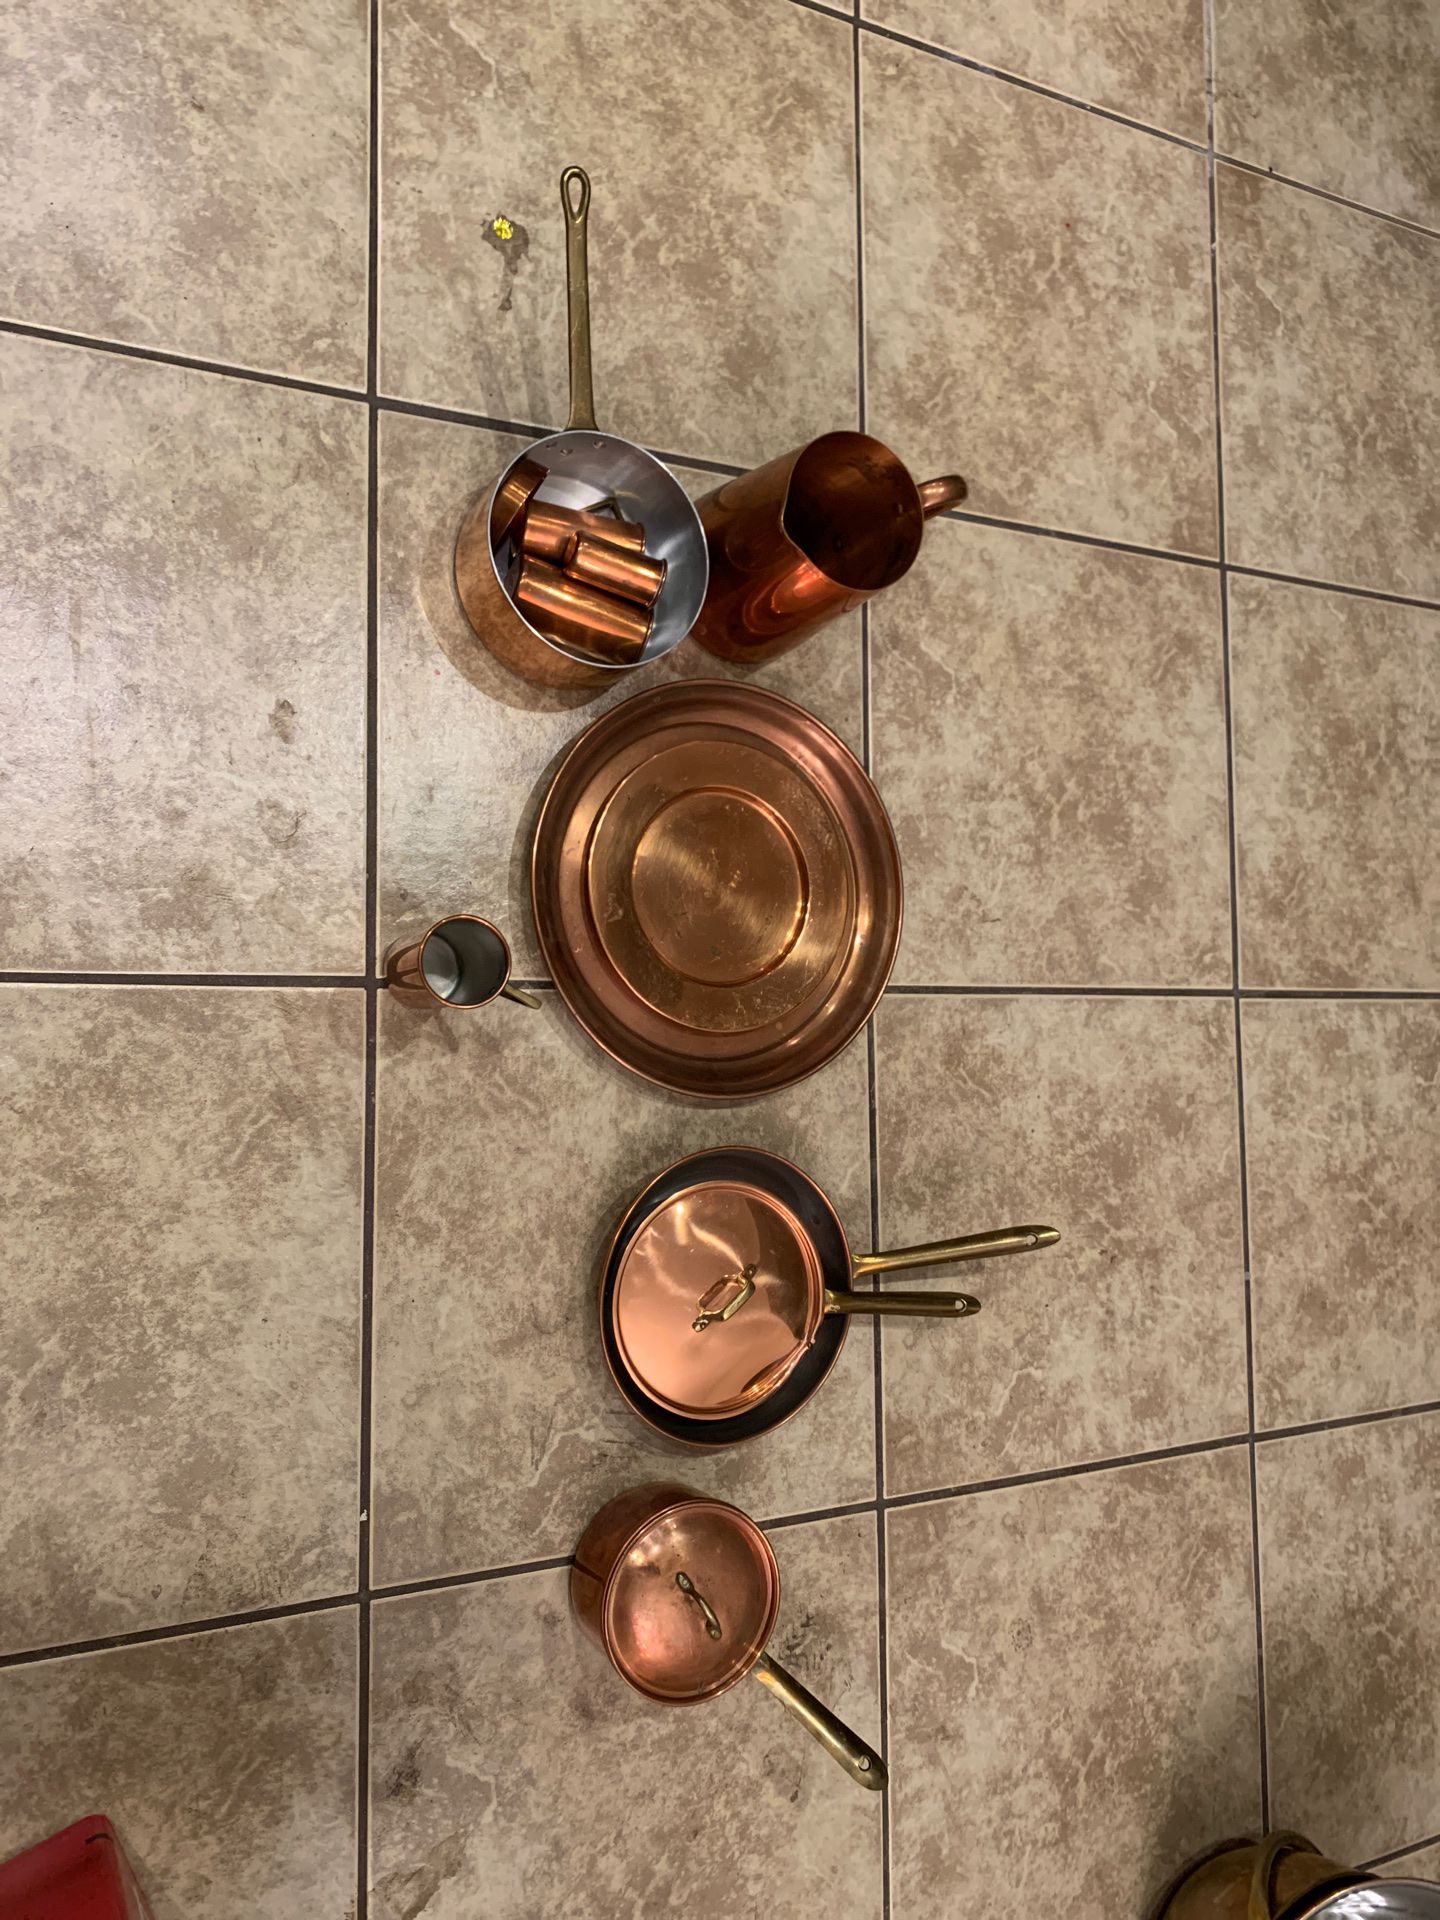 Solid copper pots and pans